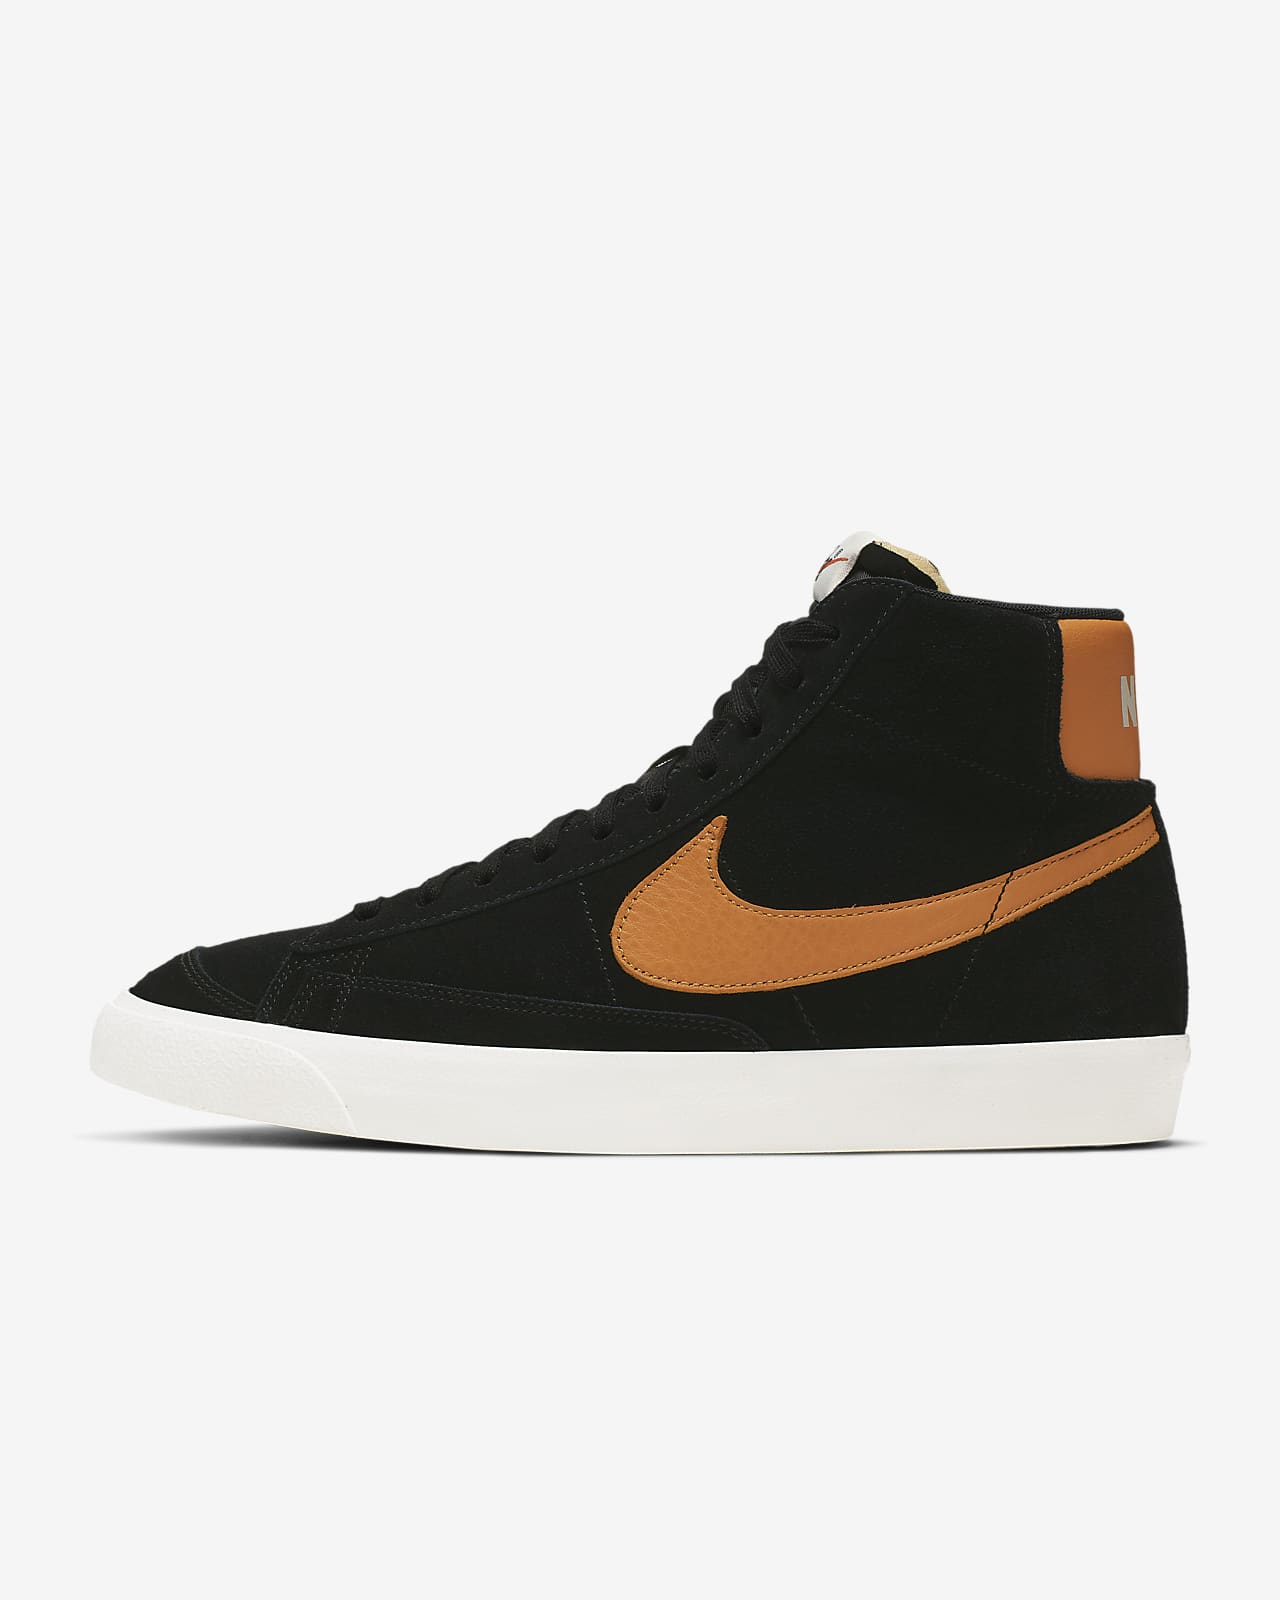 Chaussure Nike Blazer '77 pour Homme